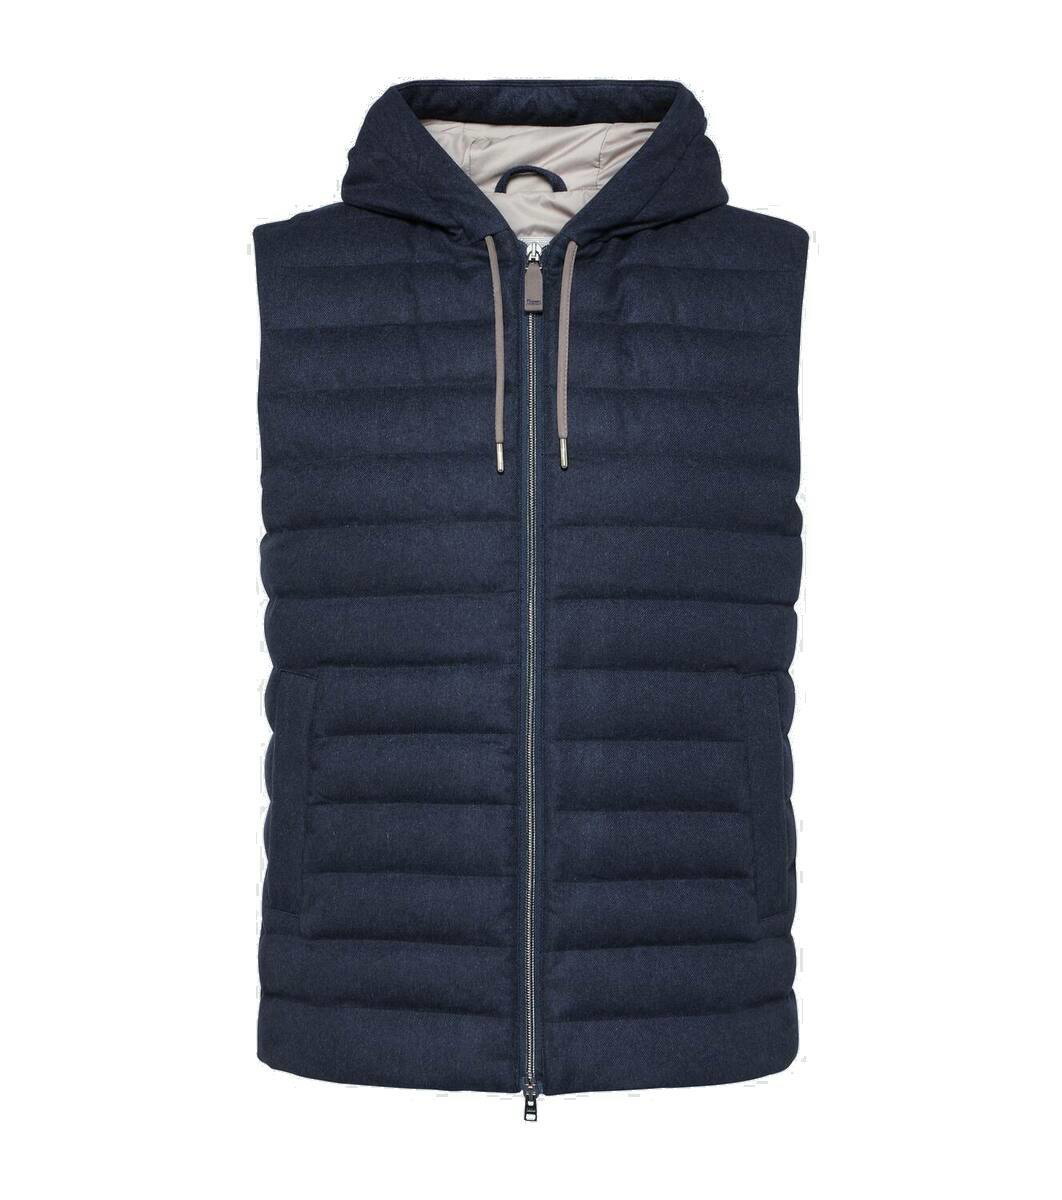 Herno quilted hooded gilet - Blue